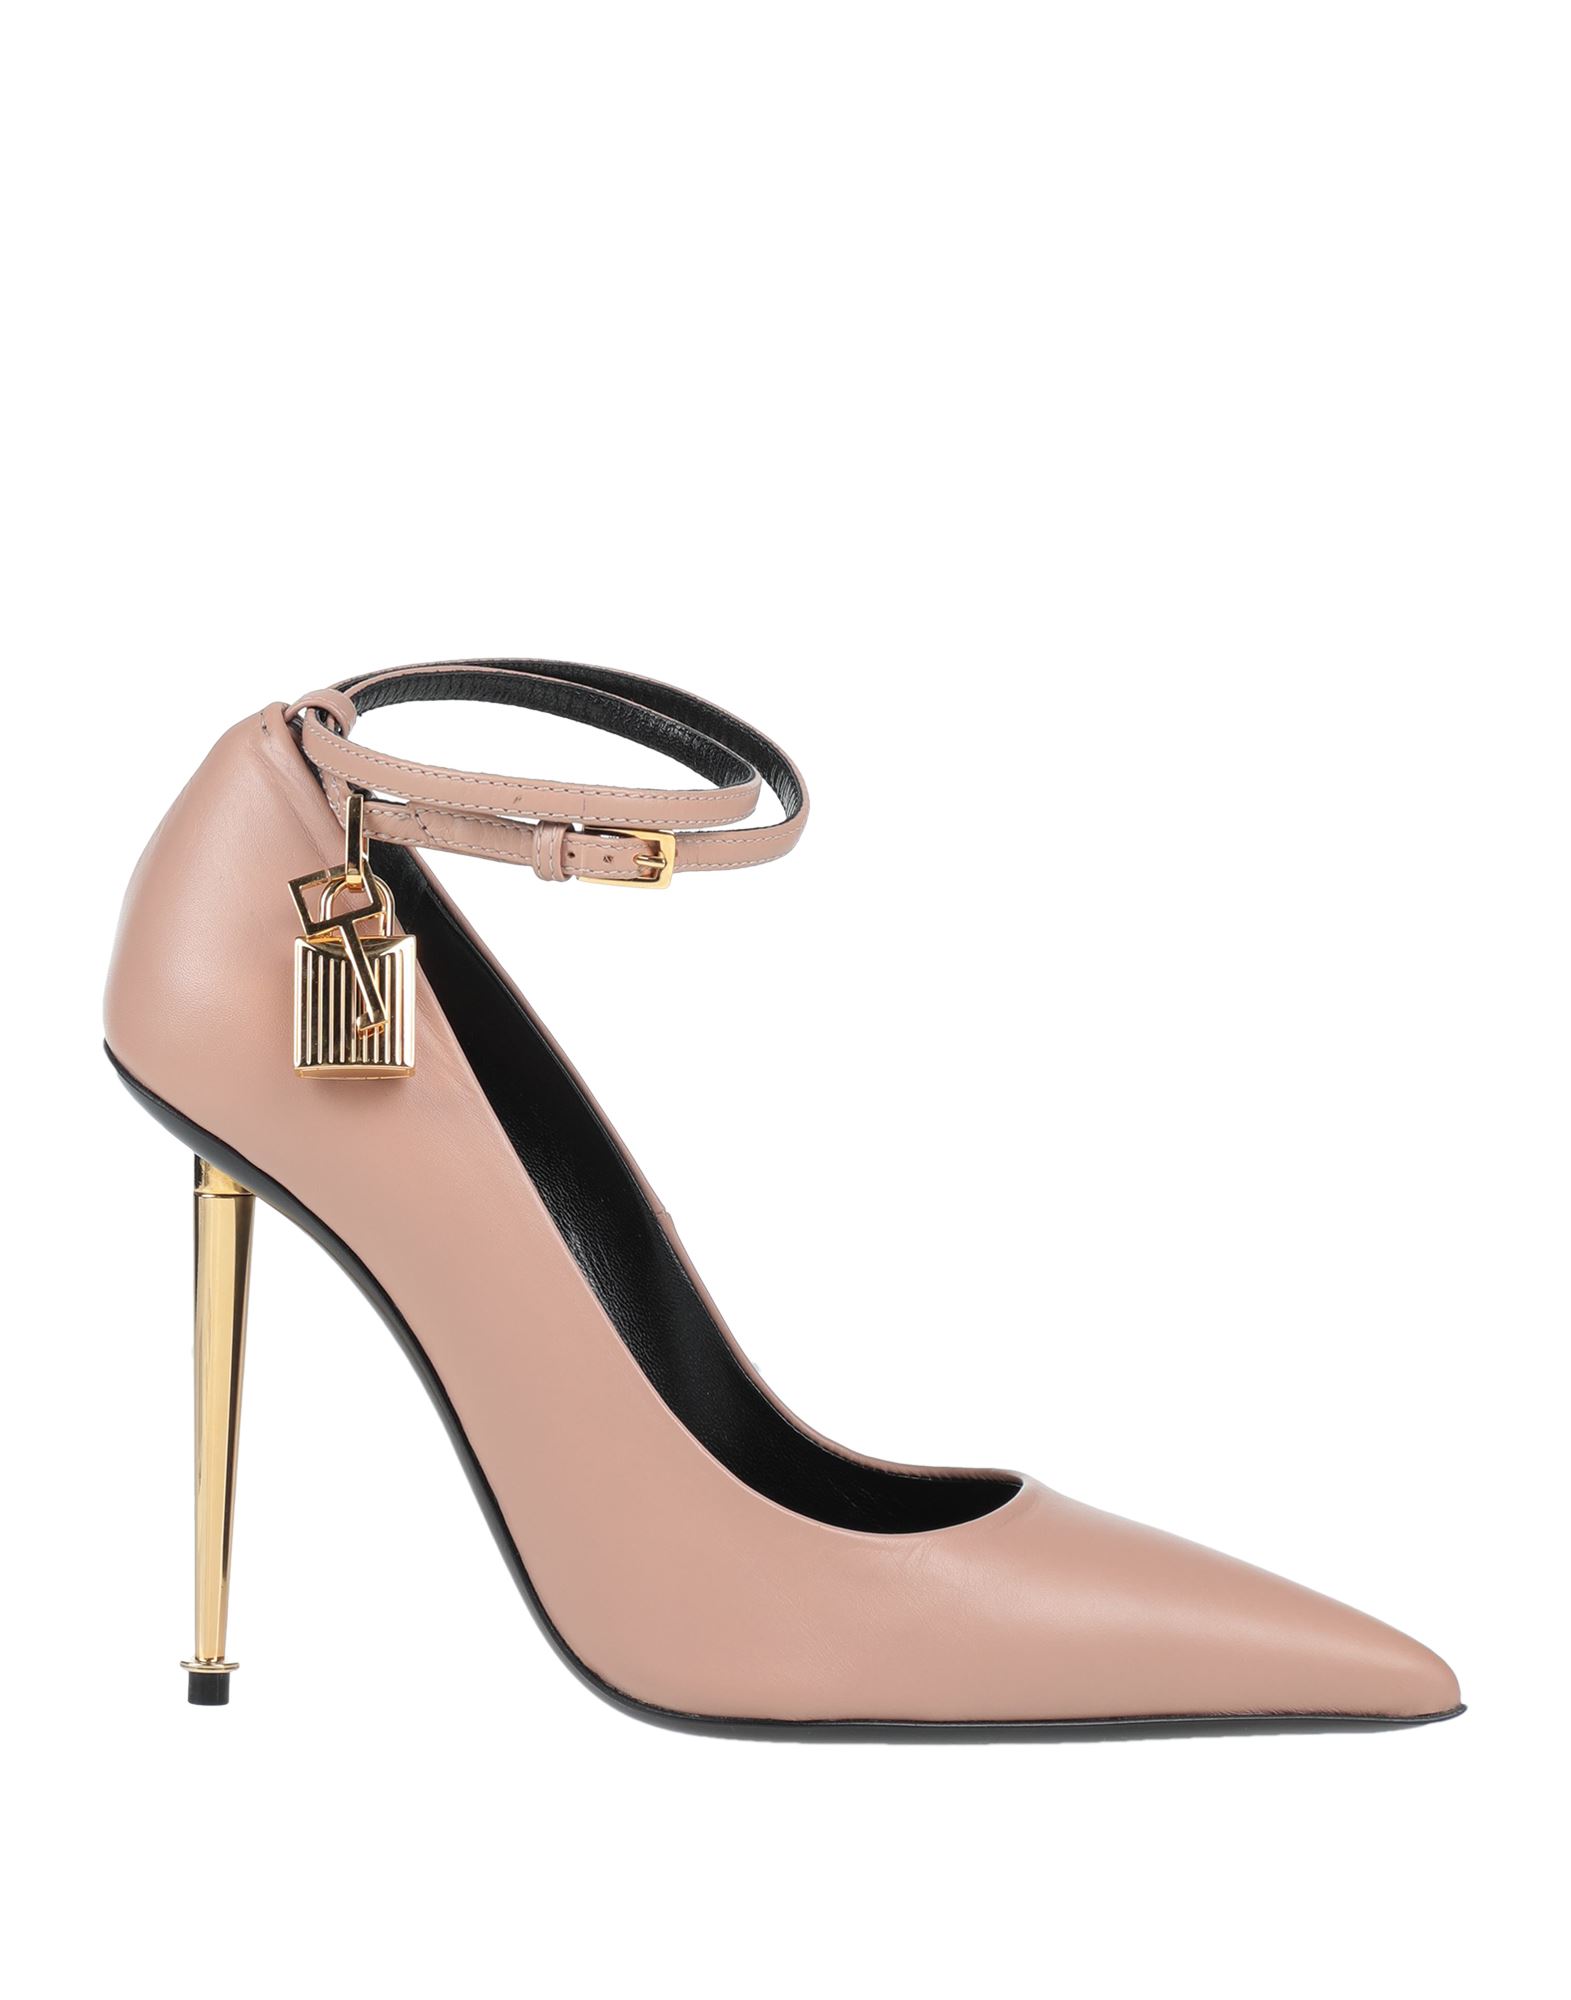 Tom Ford Pumps In Pale Pink